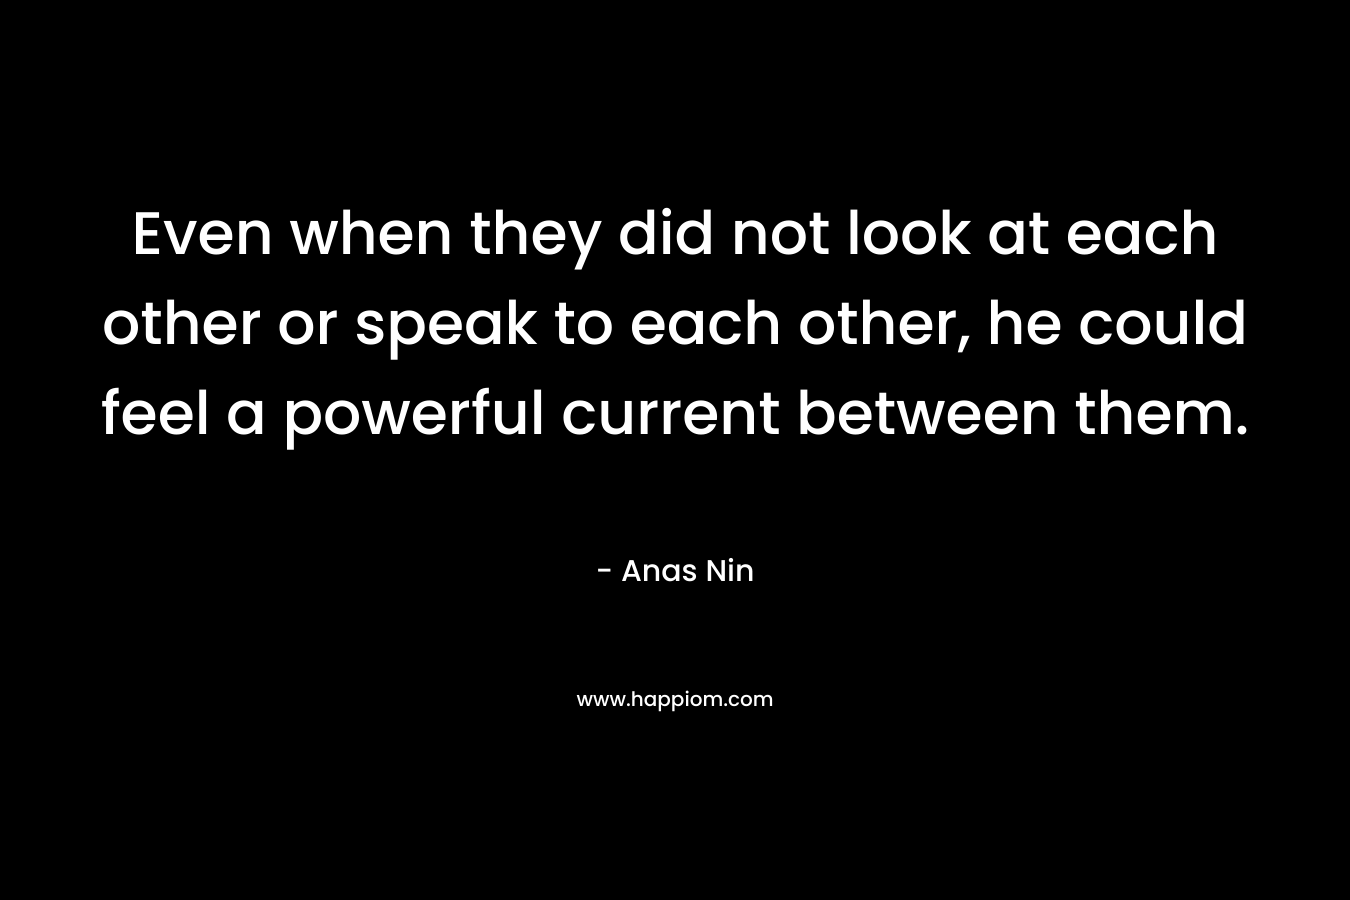 Even when they did not look at each other or speak to each other, he could feel a powerful current between them. – Anas Nin